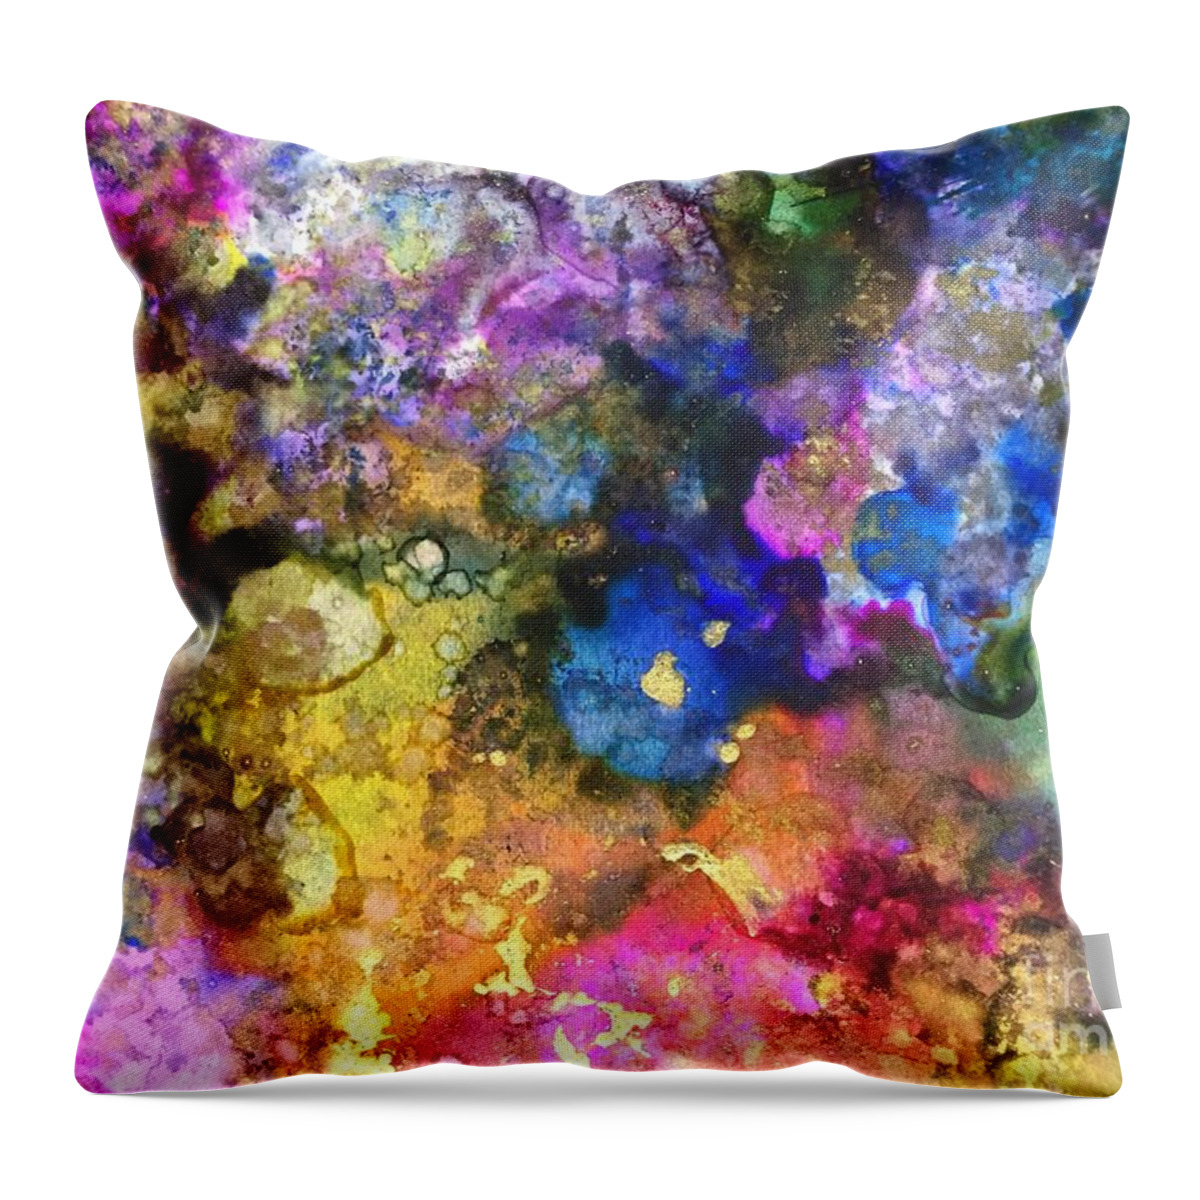 Abstract Painting. Throw Pillow featuring the painting Nebula by Nancy Koehler